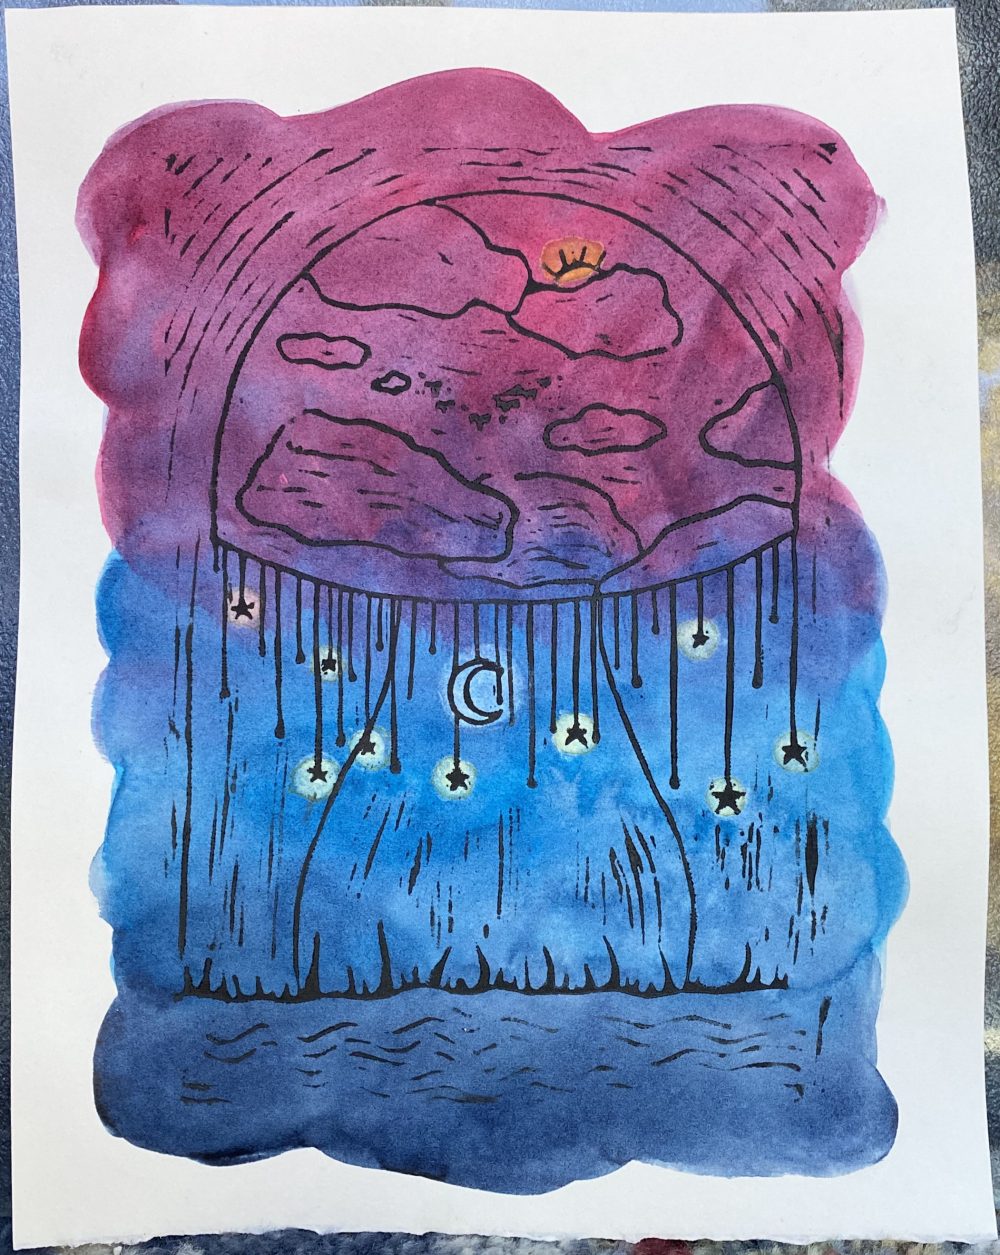 A relief print in black of a mushroom with a sunny sky in the top with starts and the moon hanging from it; printed upon a water color gradient from a dark blue to a pinkish-purple with lighter spots around each light source.